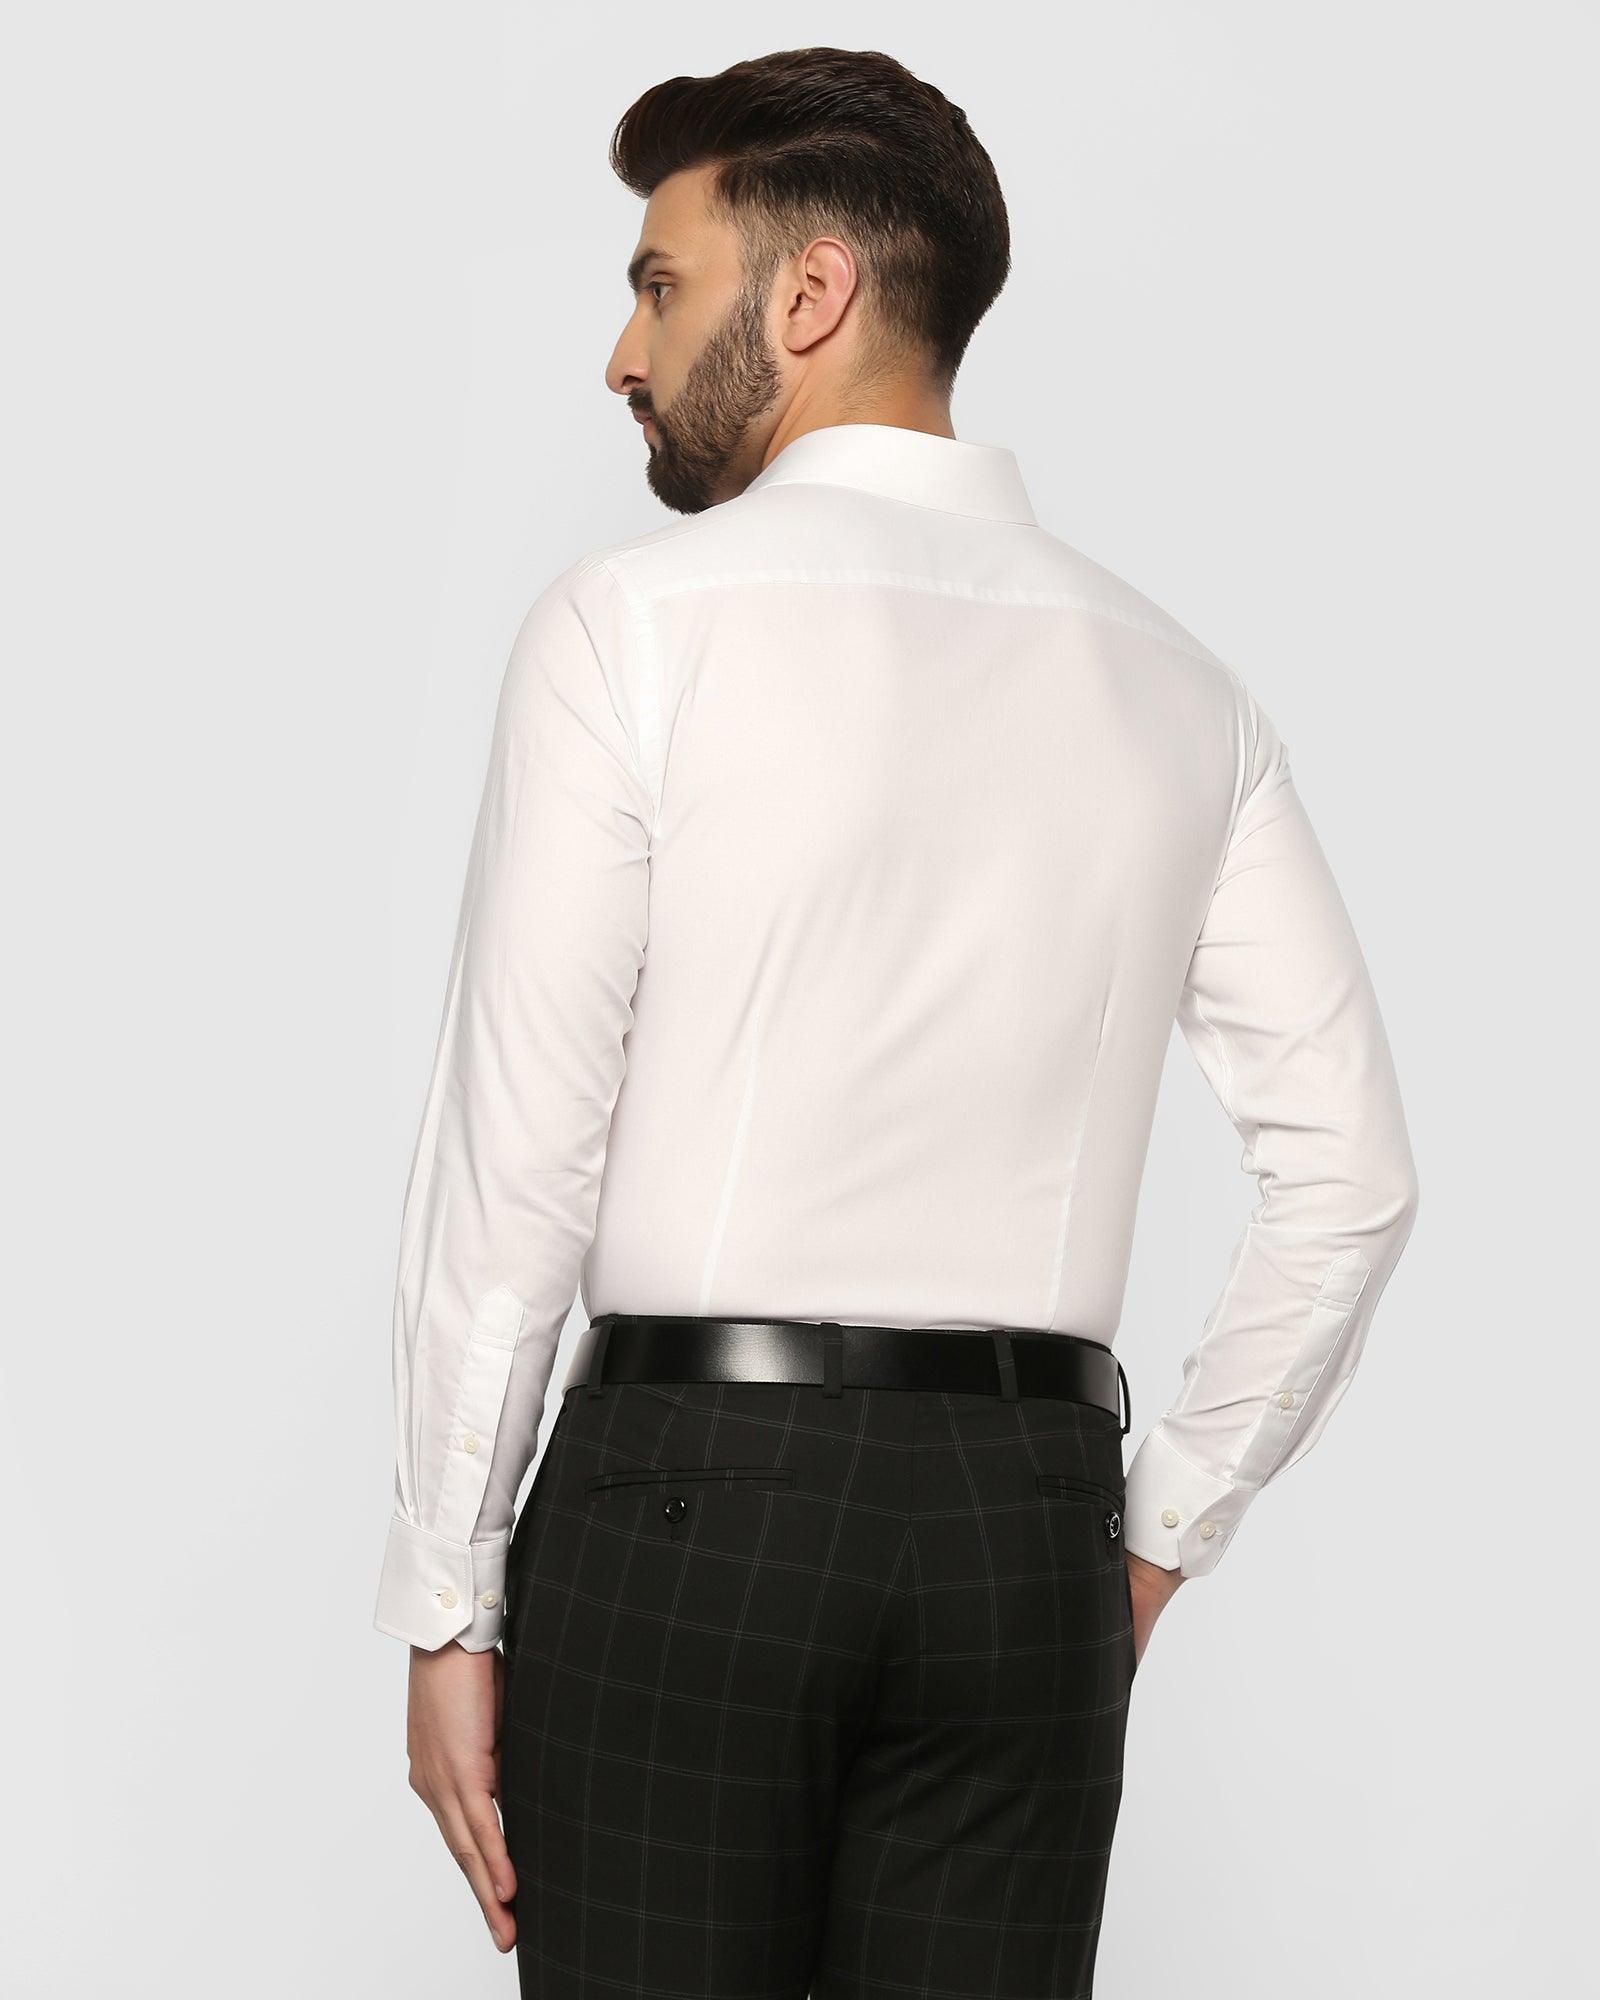 Man Wearing White Shirt And Black Tie. Concept Of Business Wear Style.  Stock Photo, Picture and Royalty Free Image. Image 103358130.